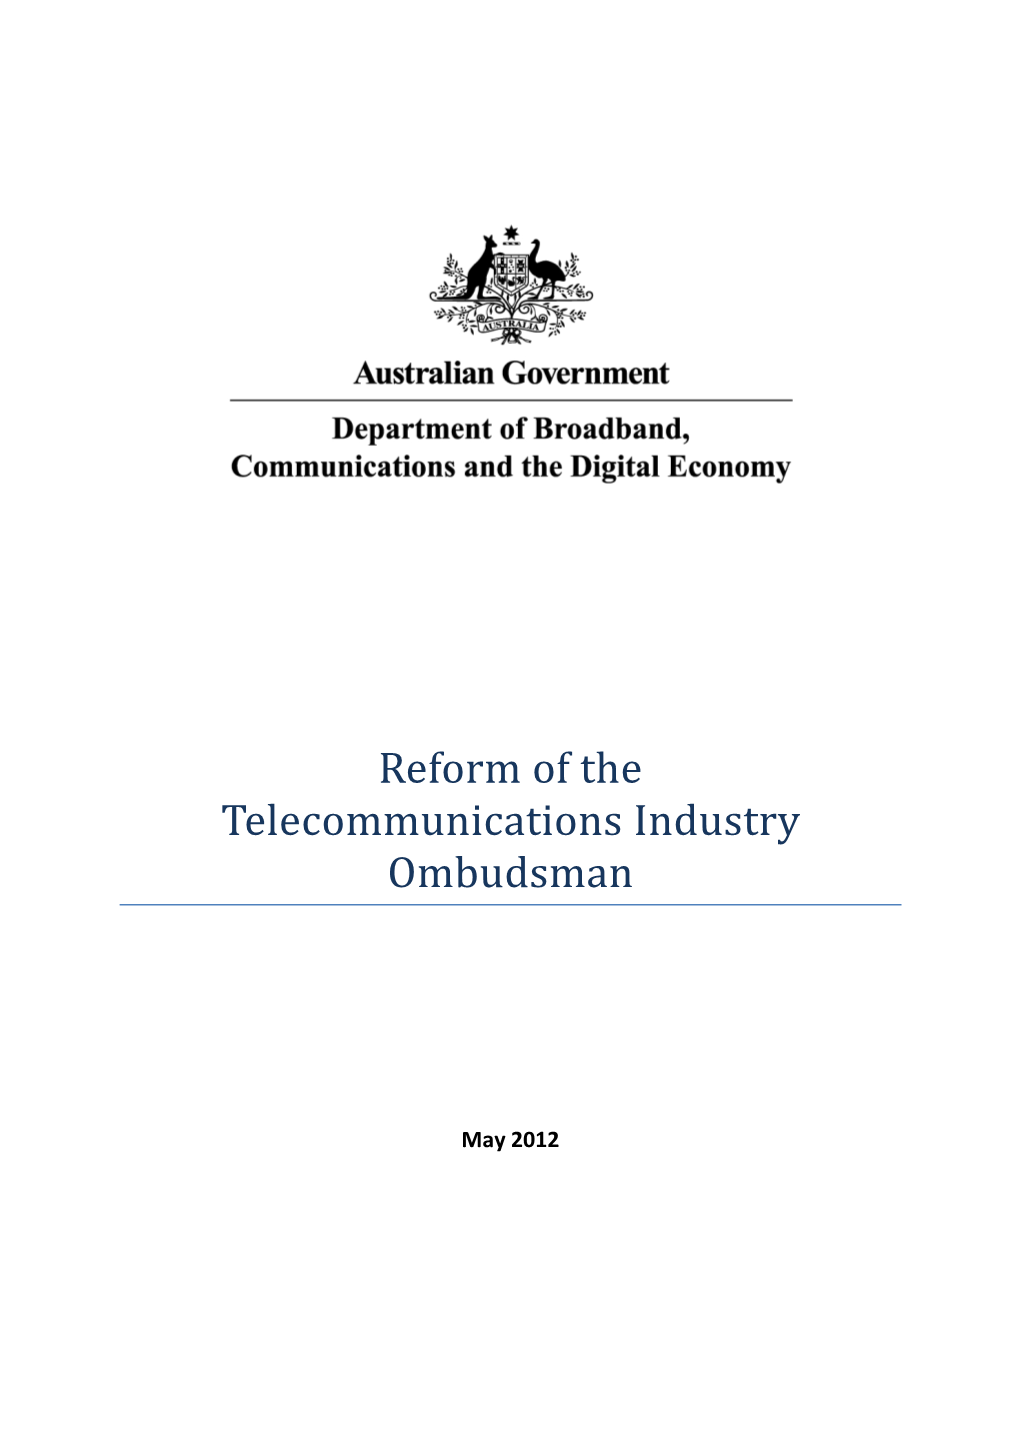 Reform of the Telecommunications Industry Ombudsman